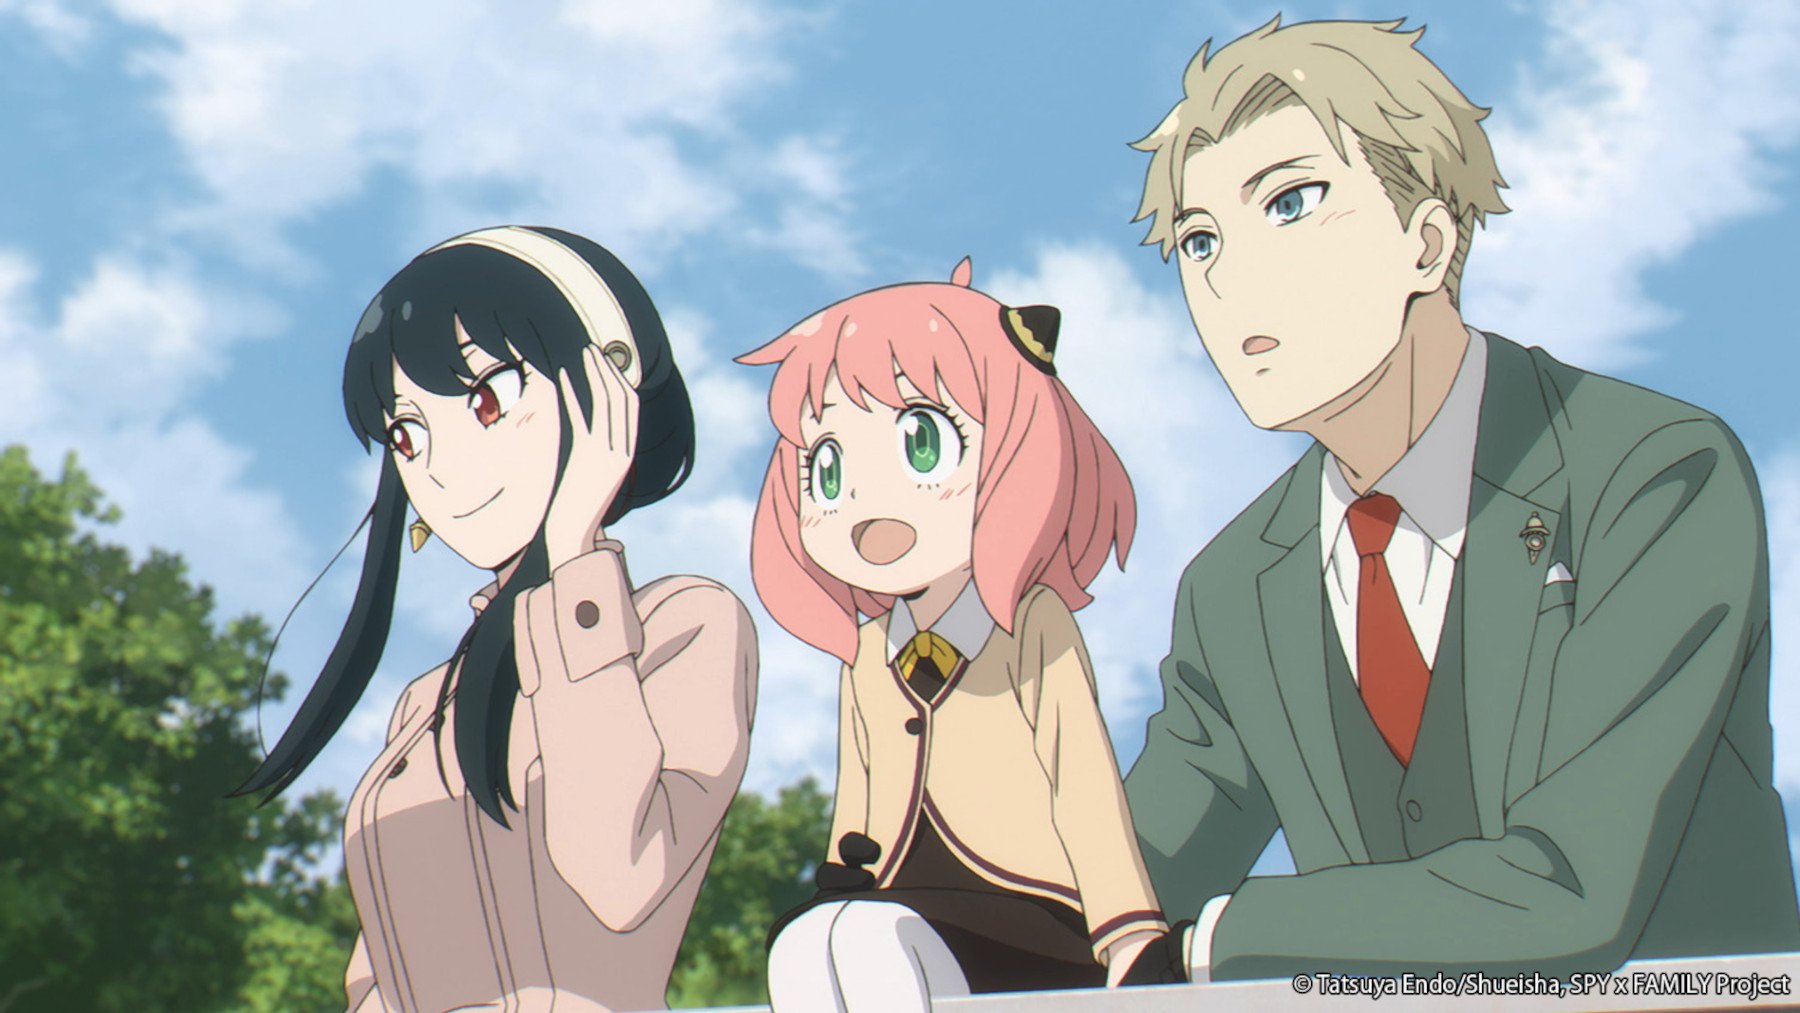 A still of 'Spy x Family' for our article covering the best anime of 2022. It shows Yor, Anya, and Loid Forger standing before a blue sky and looking out at the view.